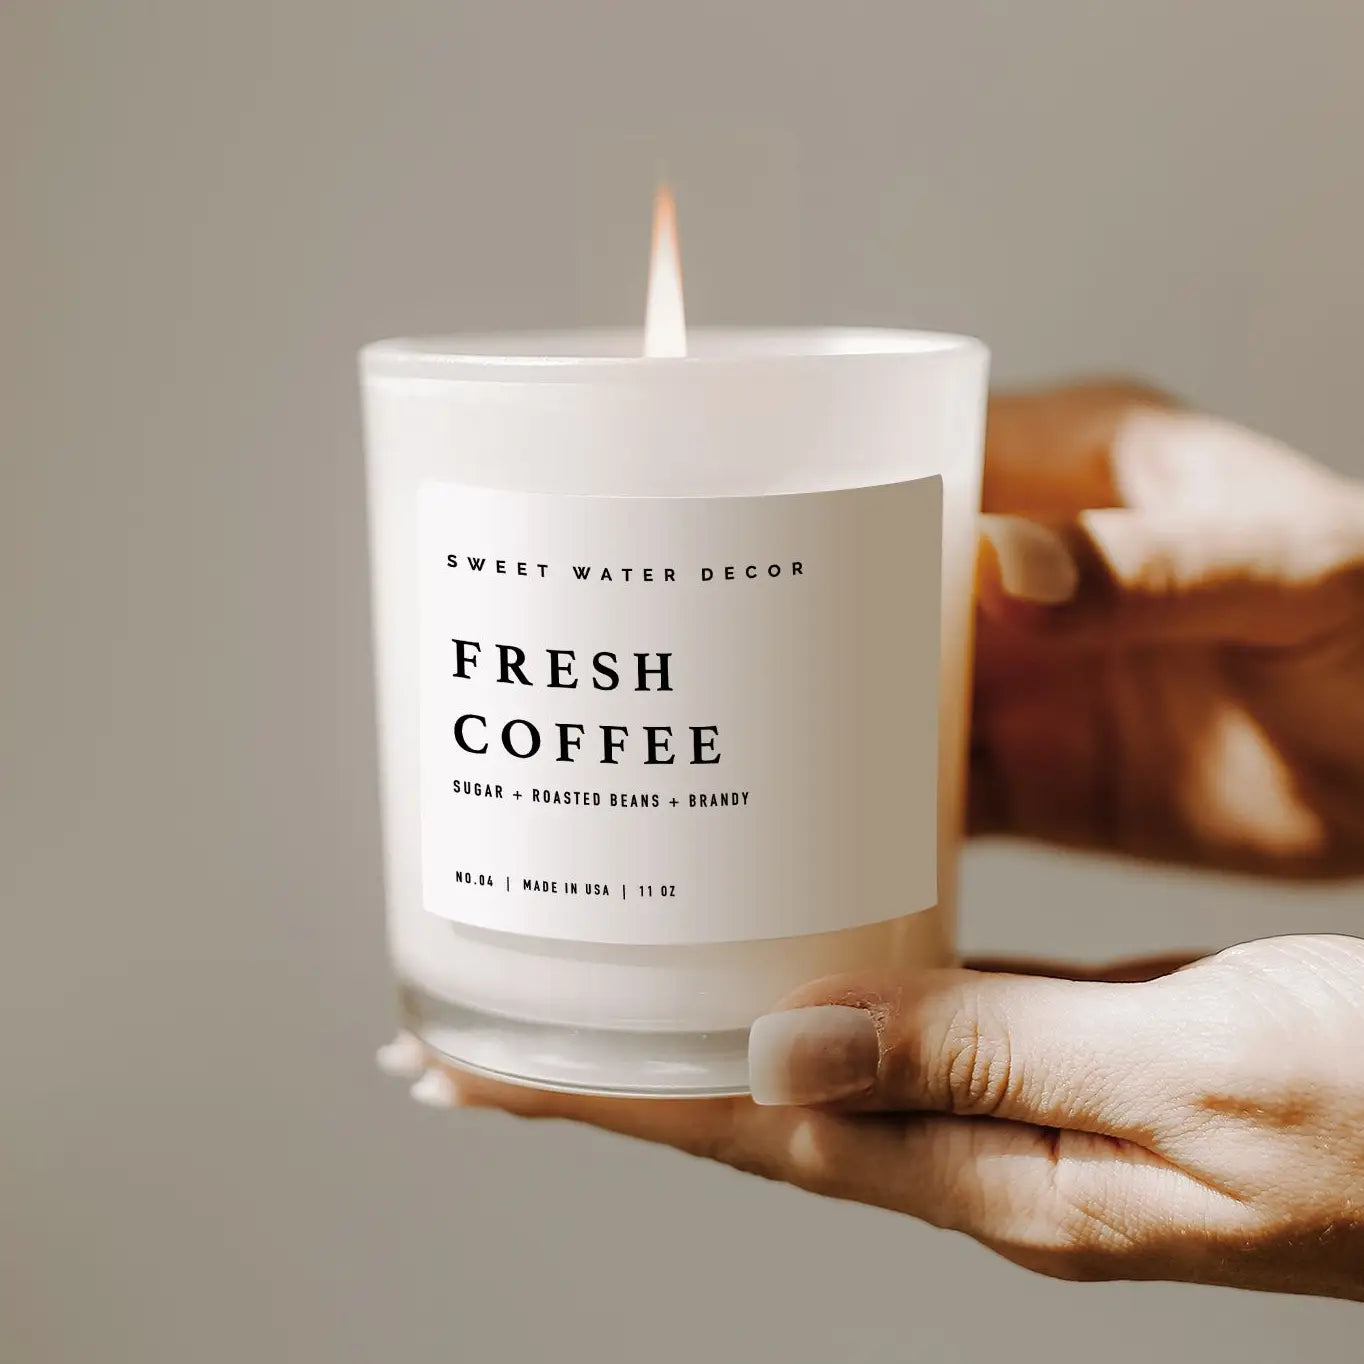 Fresh coffee soy candle in white jar, lit and held up in two hands.